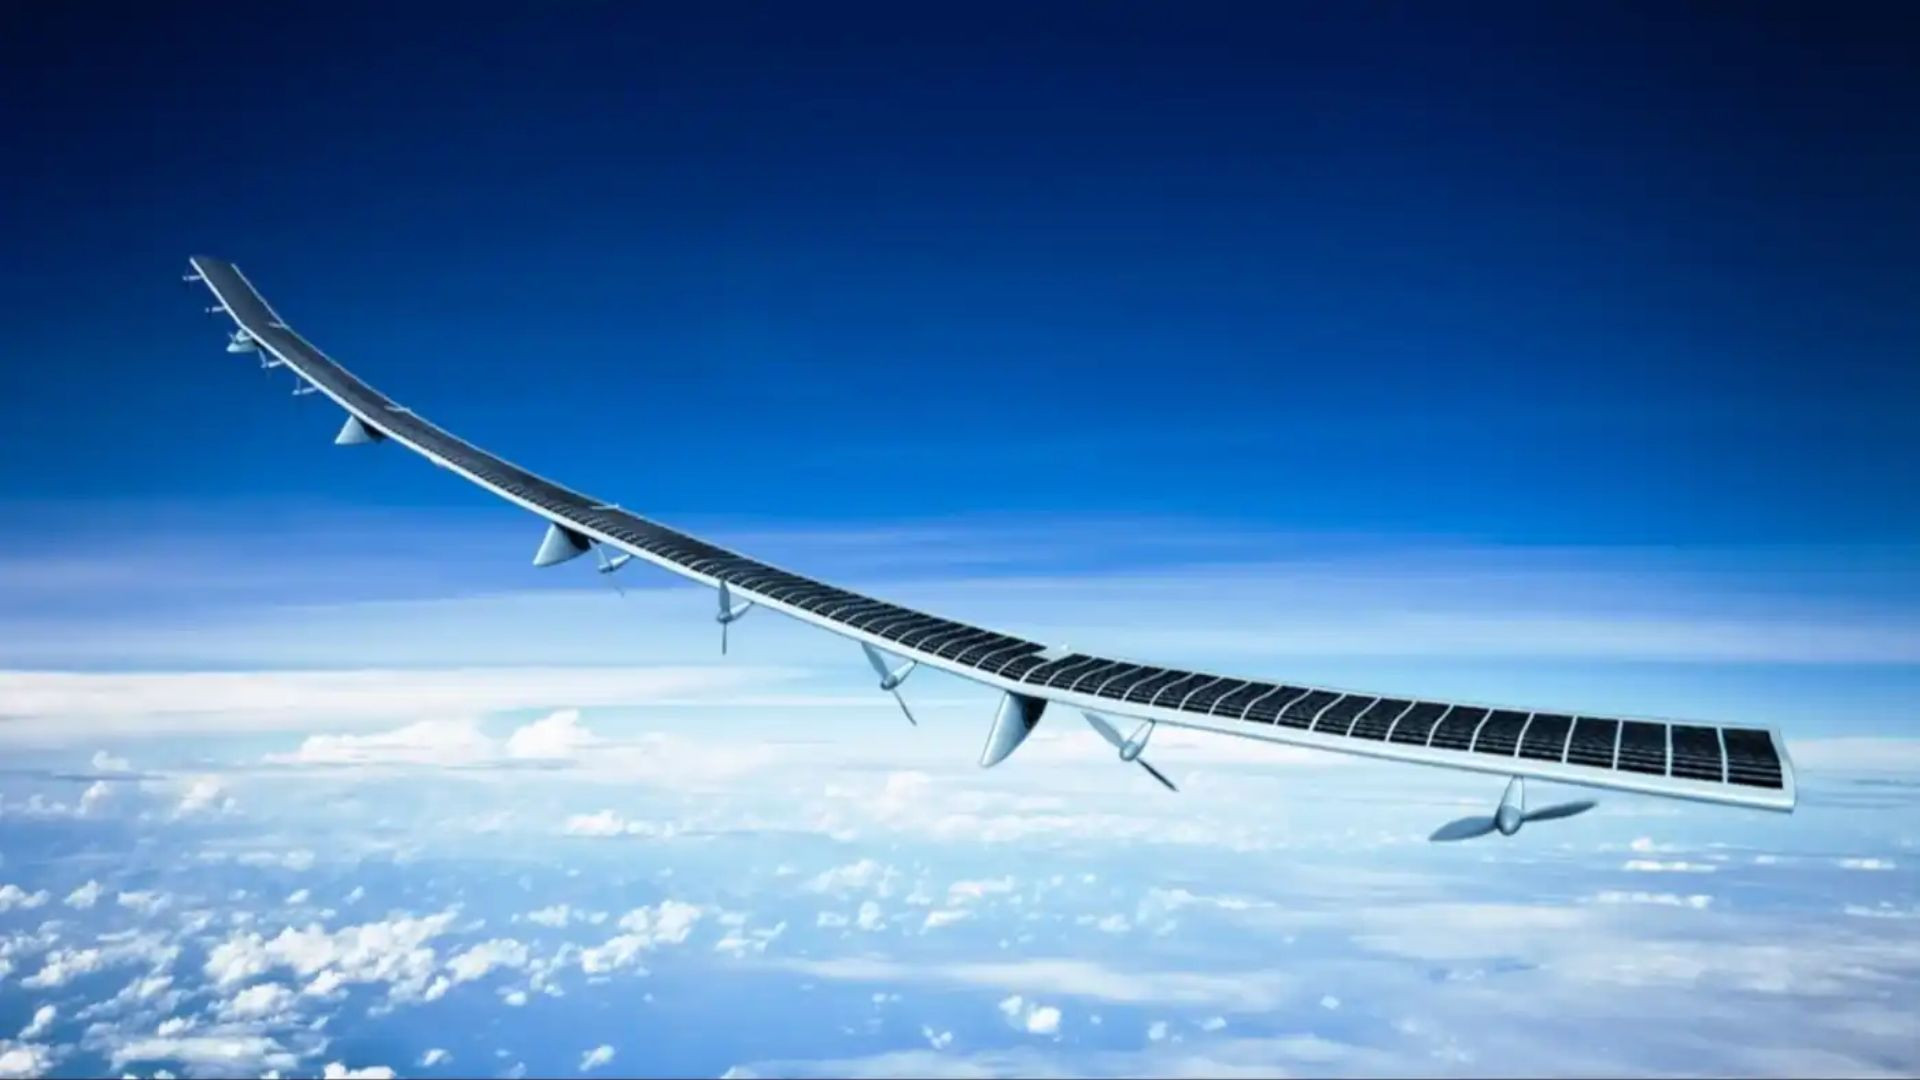 Japan to dispatch solar-powered, flying 5G mobile base station in 2025